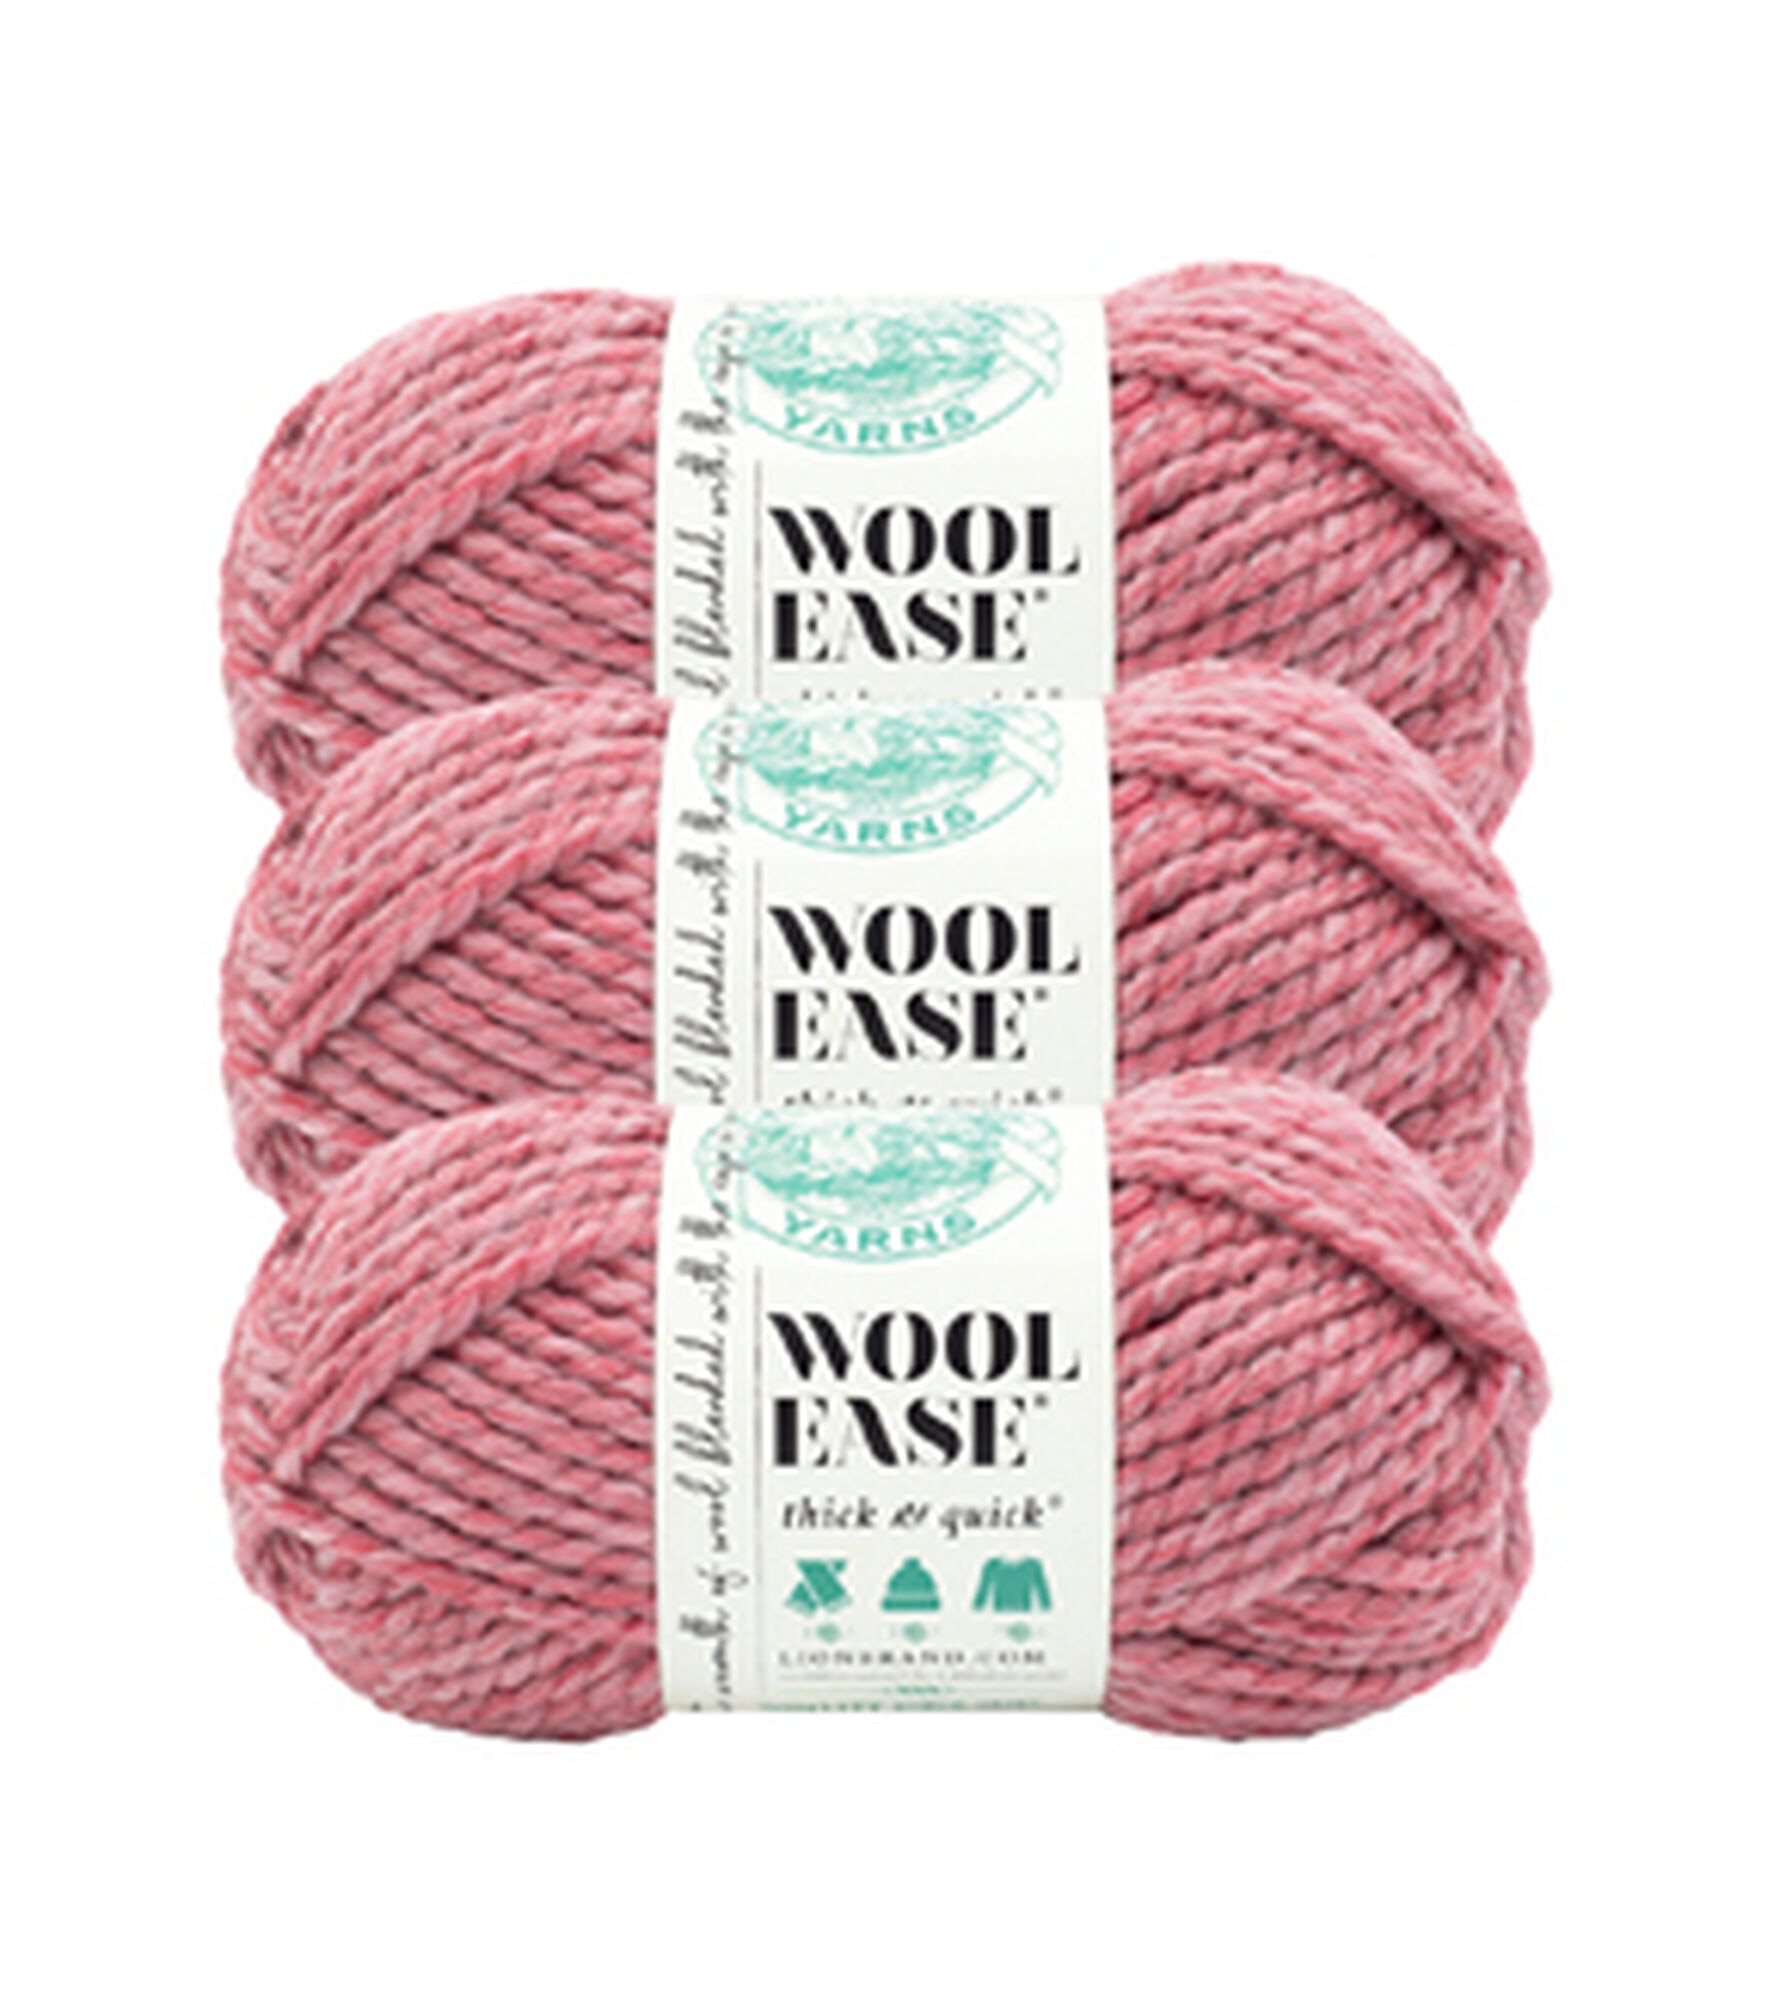 Lion Brand Wool-Ease Thick & Quick Yarn-Starlight - Metallic, 1 count - Jay  C Food Stores